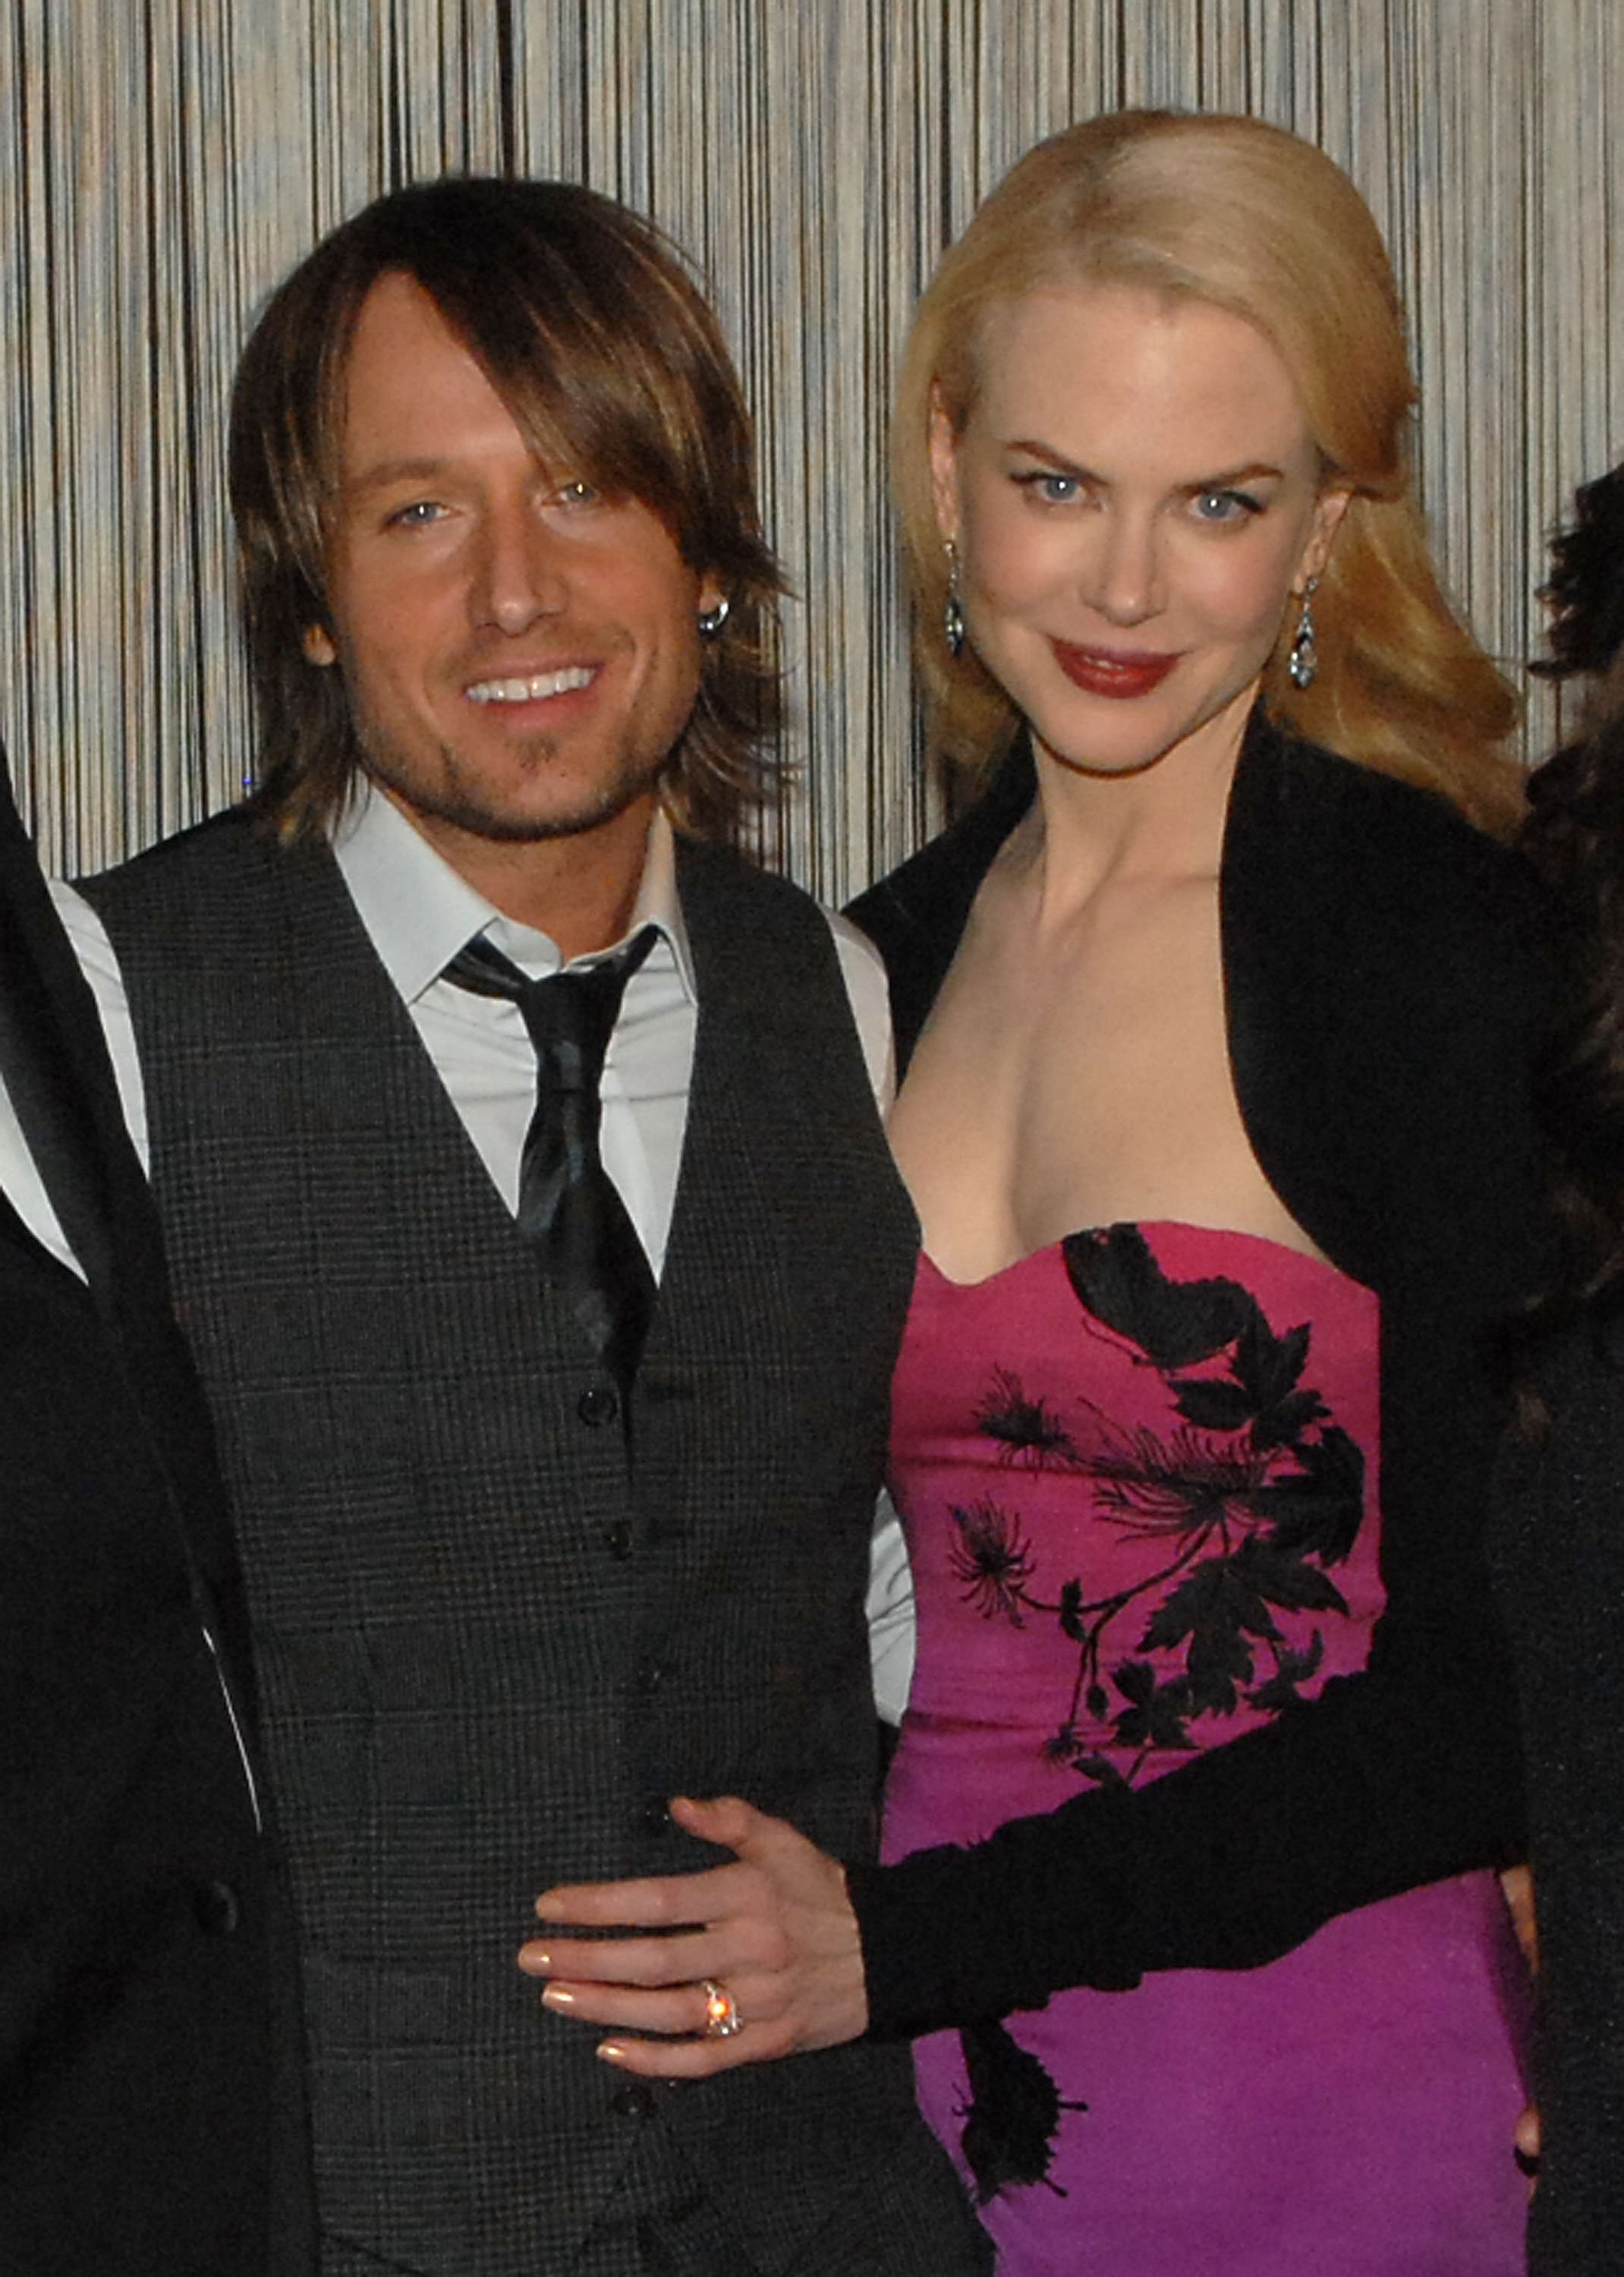 Musician Keith Urban and actress Nicole Kidman attend Capitol Records Nashville CMA Awards post show celebration at Lay'la Lounge on November 11, 2007 in Nashville, Tennessee | Source: Getty Images